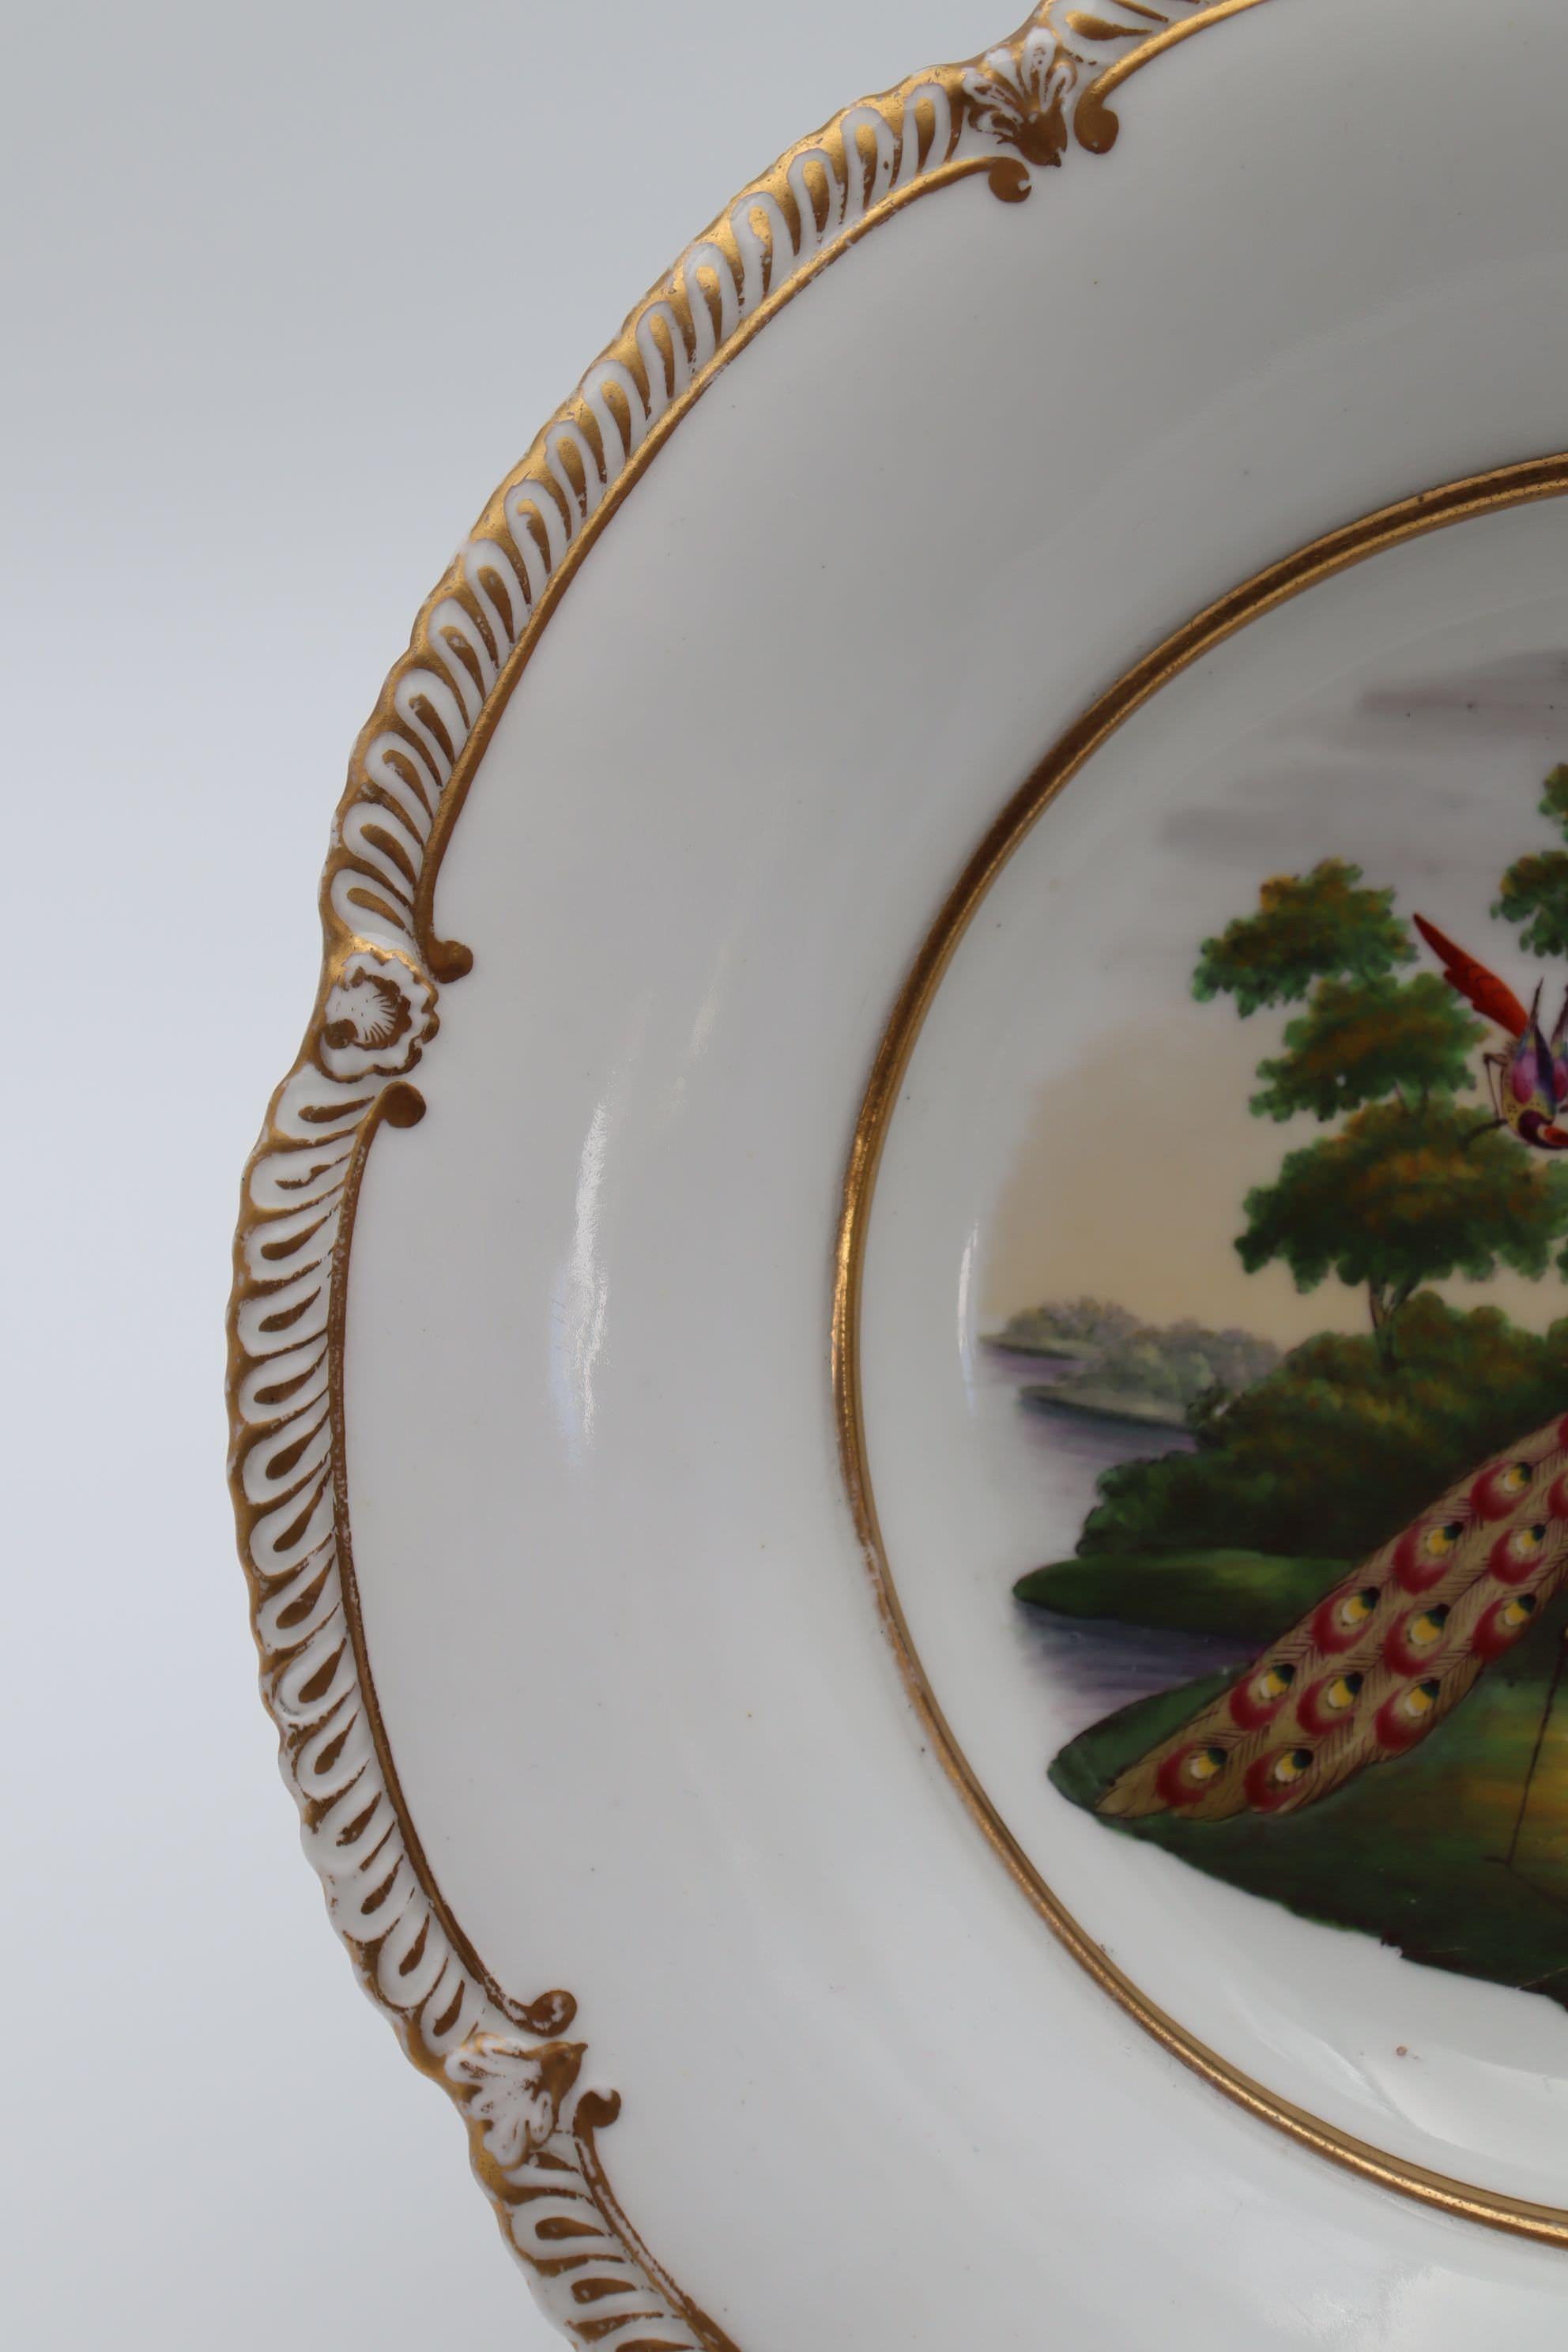 Regency Chamberlain Worcester Porcelain Comport Decorated with Fancy Birds For Sale